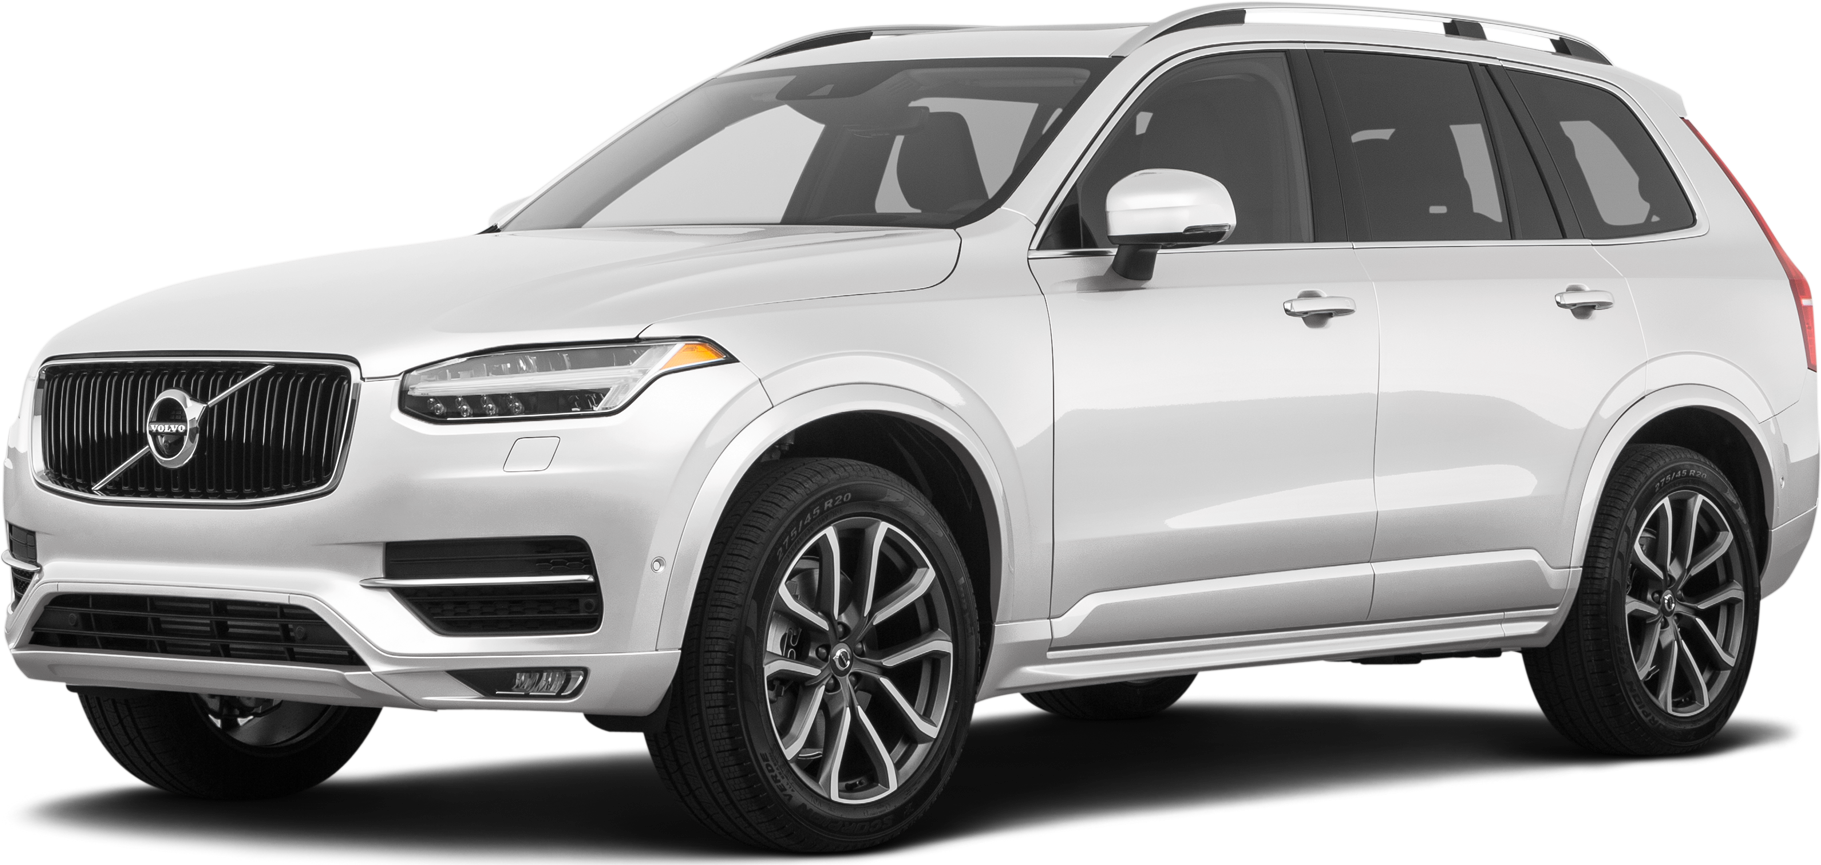 2009 Volvo XC90 Price, Value, Ratings & Reviews